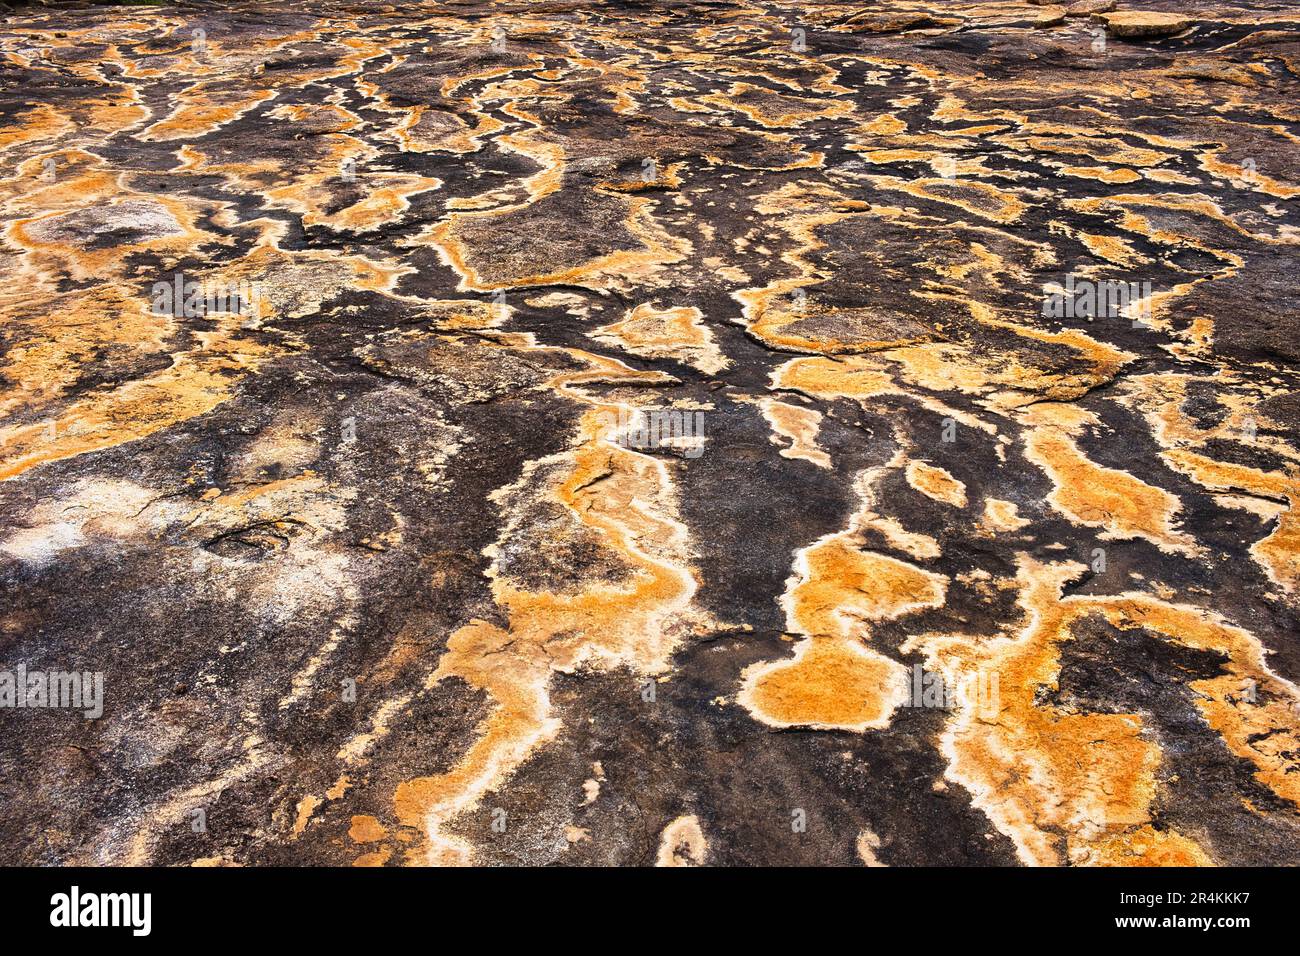 Abstract patterns of lichen and water run-off on granite in Cape Le Grand National Park, Esperance, Western Australia Stock Photo